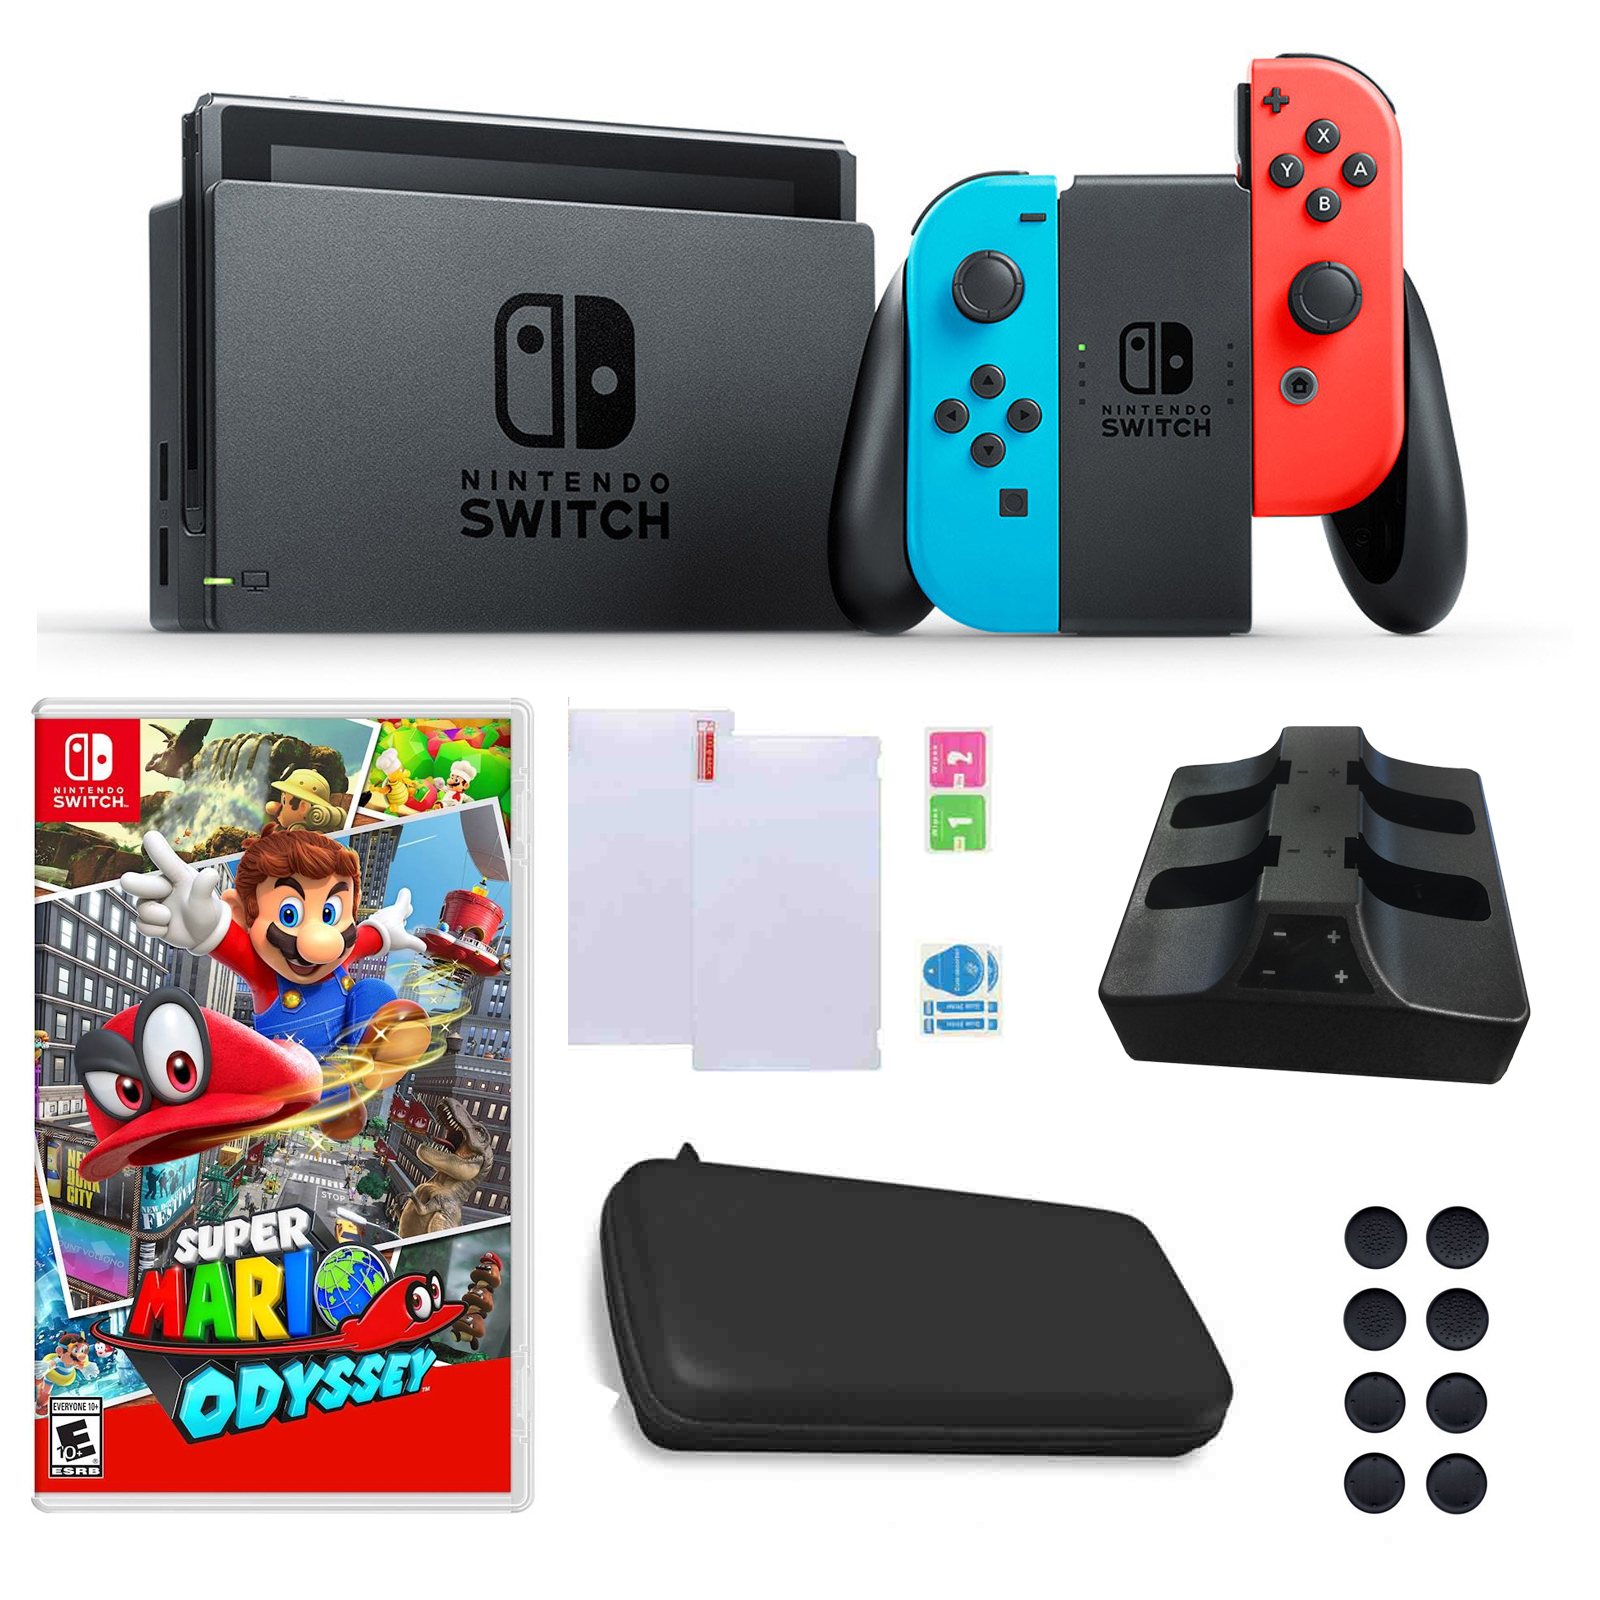 Nintendo  Switch in Neon with Mario Odyssey Game and Accessories Bundle